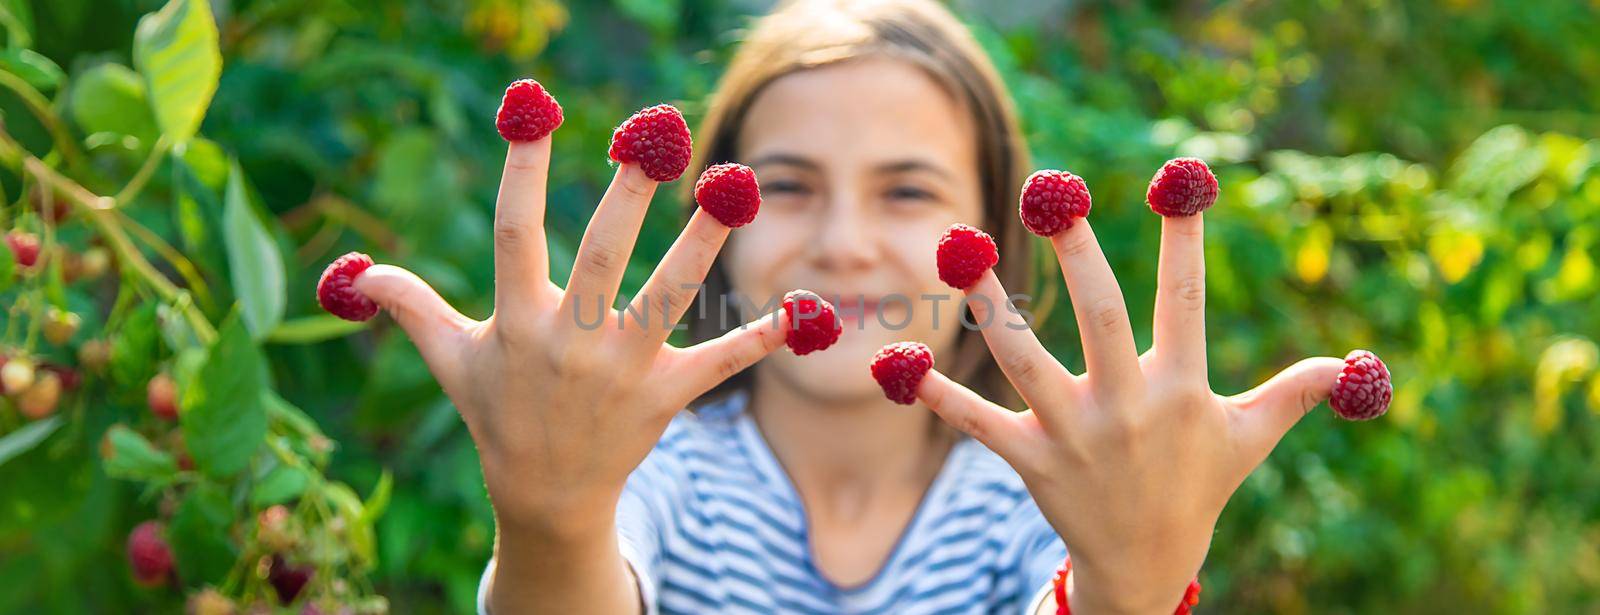 A child harvests raspberries in the garden. Selective focus. by yanadjana